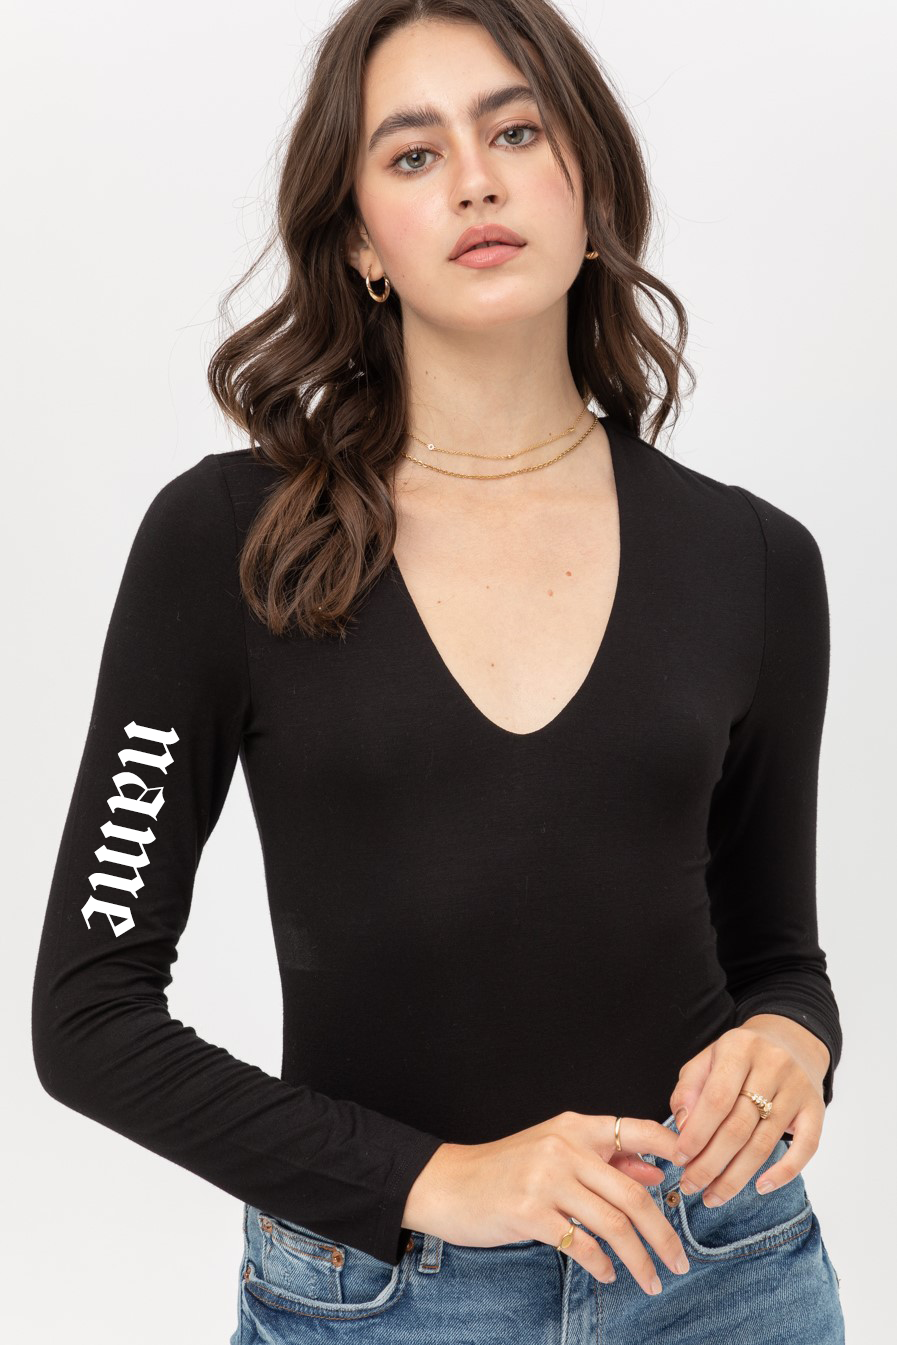 The Digits Black Long Sleeve Body Suit